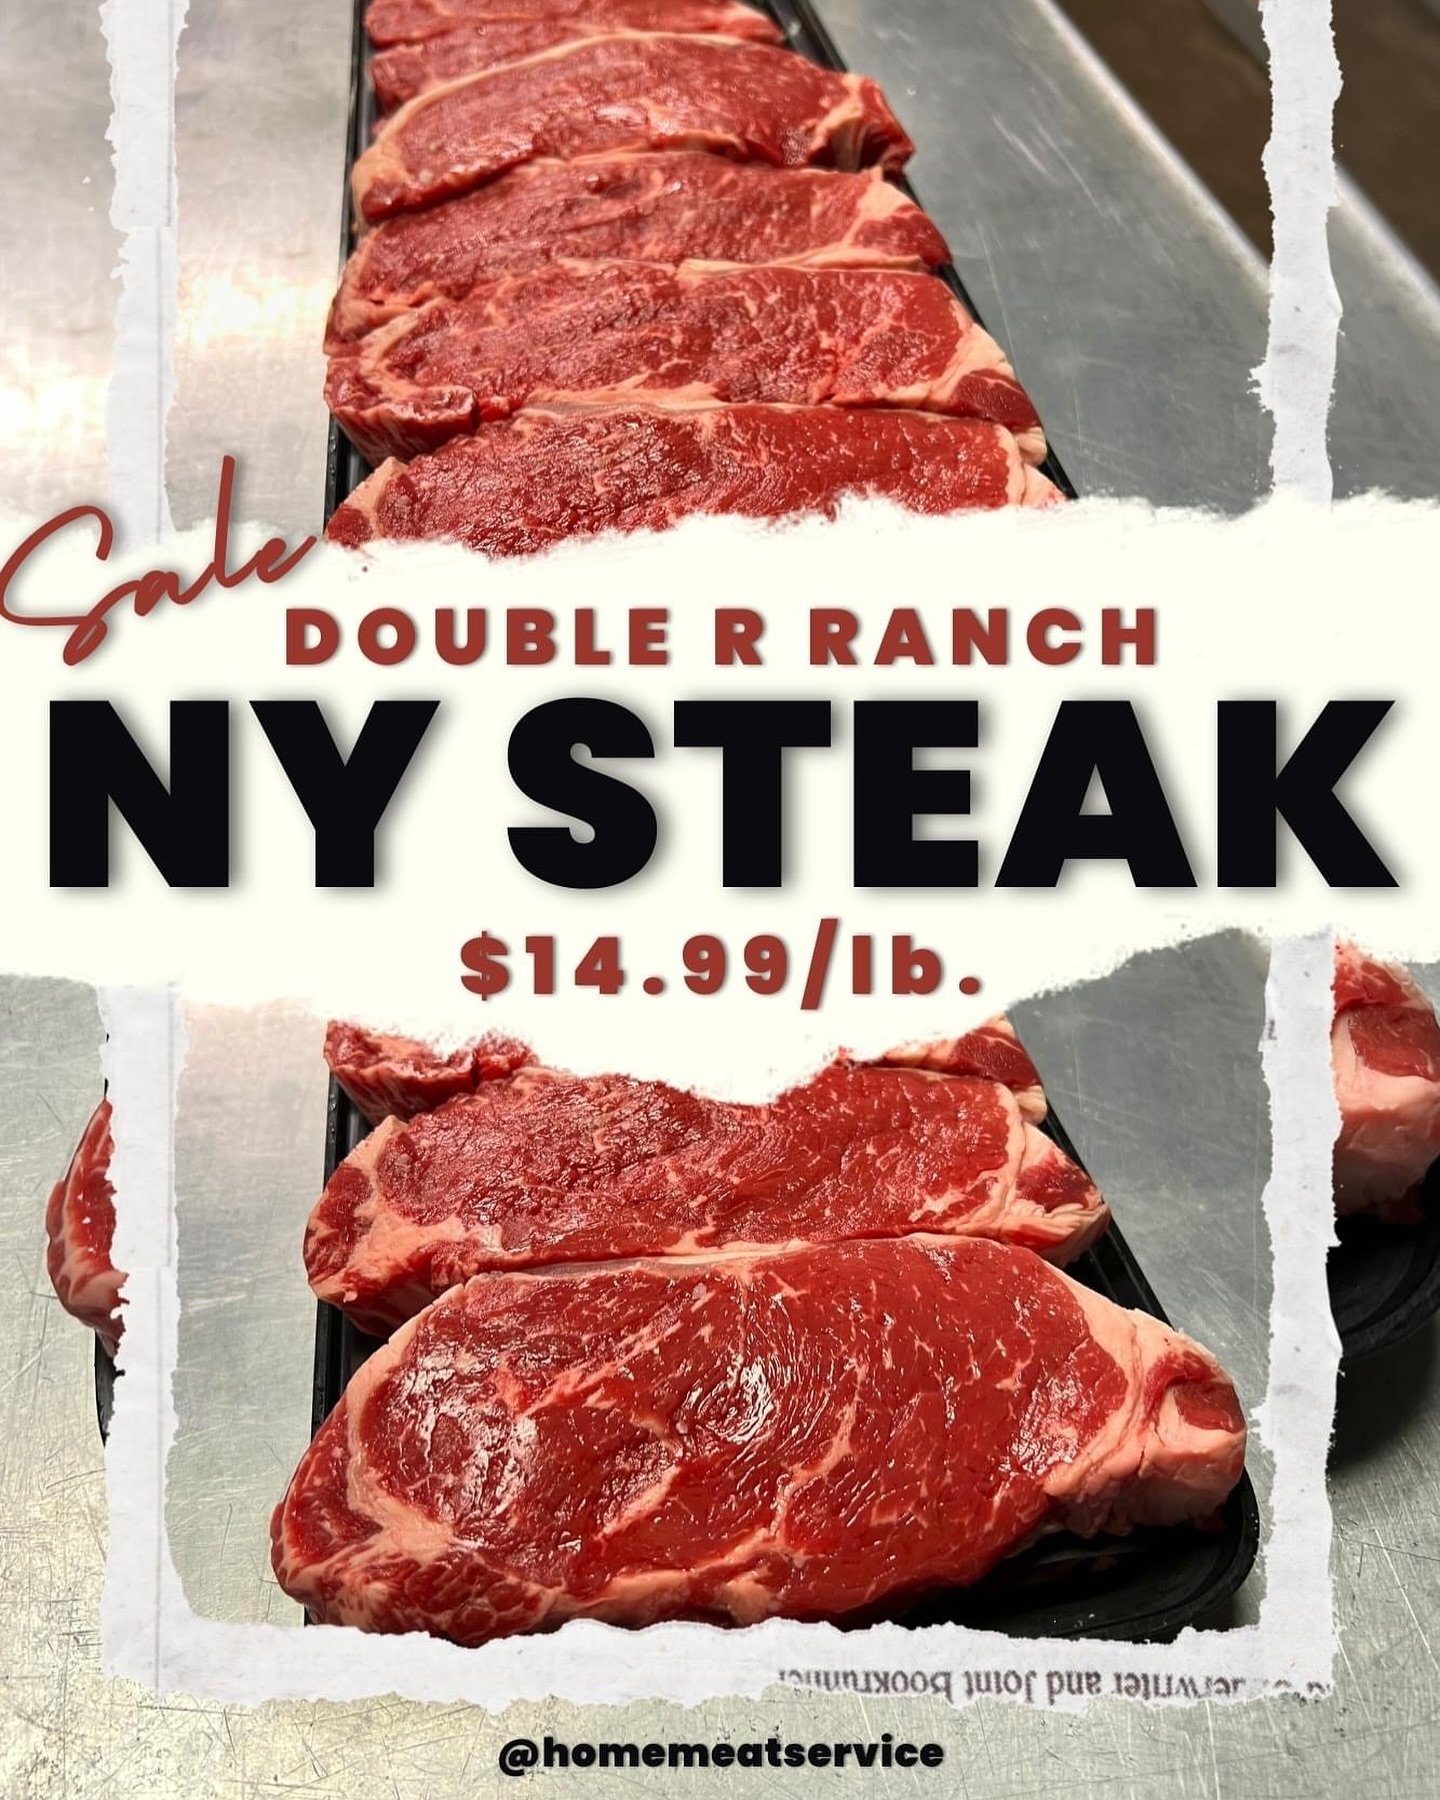 🥩🔥 Sizzling Steaks, Savory Savings! 🍽️

This week only, get your hands on premium 𝗗𝗼𝘂𝗯𝗹𝗲 𝗥 𝗥𝗮𝗻𝗰𝗵 𝗡𝗬 𝗦𝘁𝗲𝗮𝗸𝘀 𝗳𝗼𝗿 𝗷𝘂𝘀𝘁 $𝟭𝟰.𝟵𝟵/𝗹𝗯! 🎉 Fire up the grill and treat yourself to a restaurant-worthy steak night at home! 🏠 